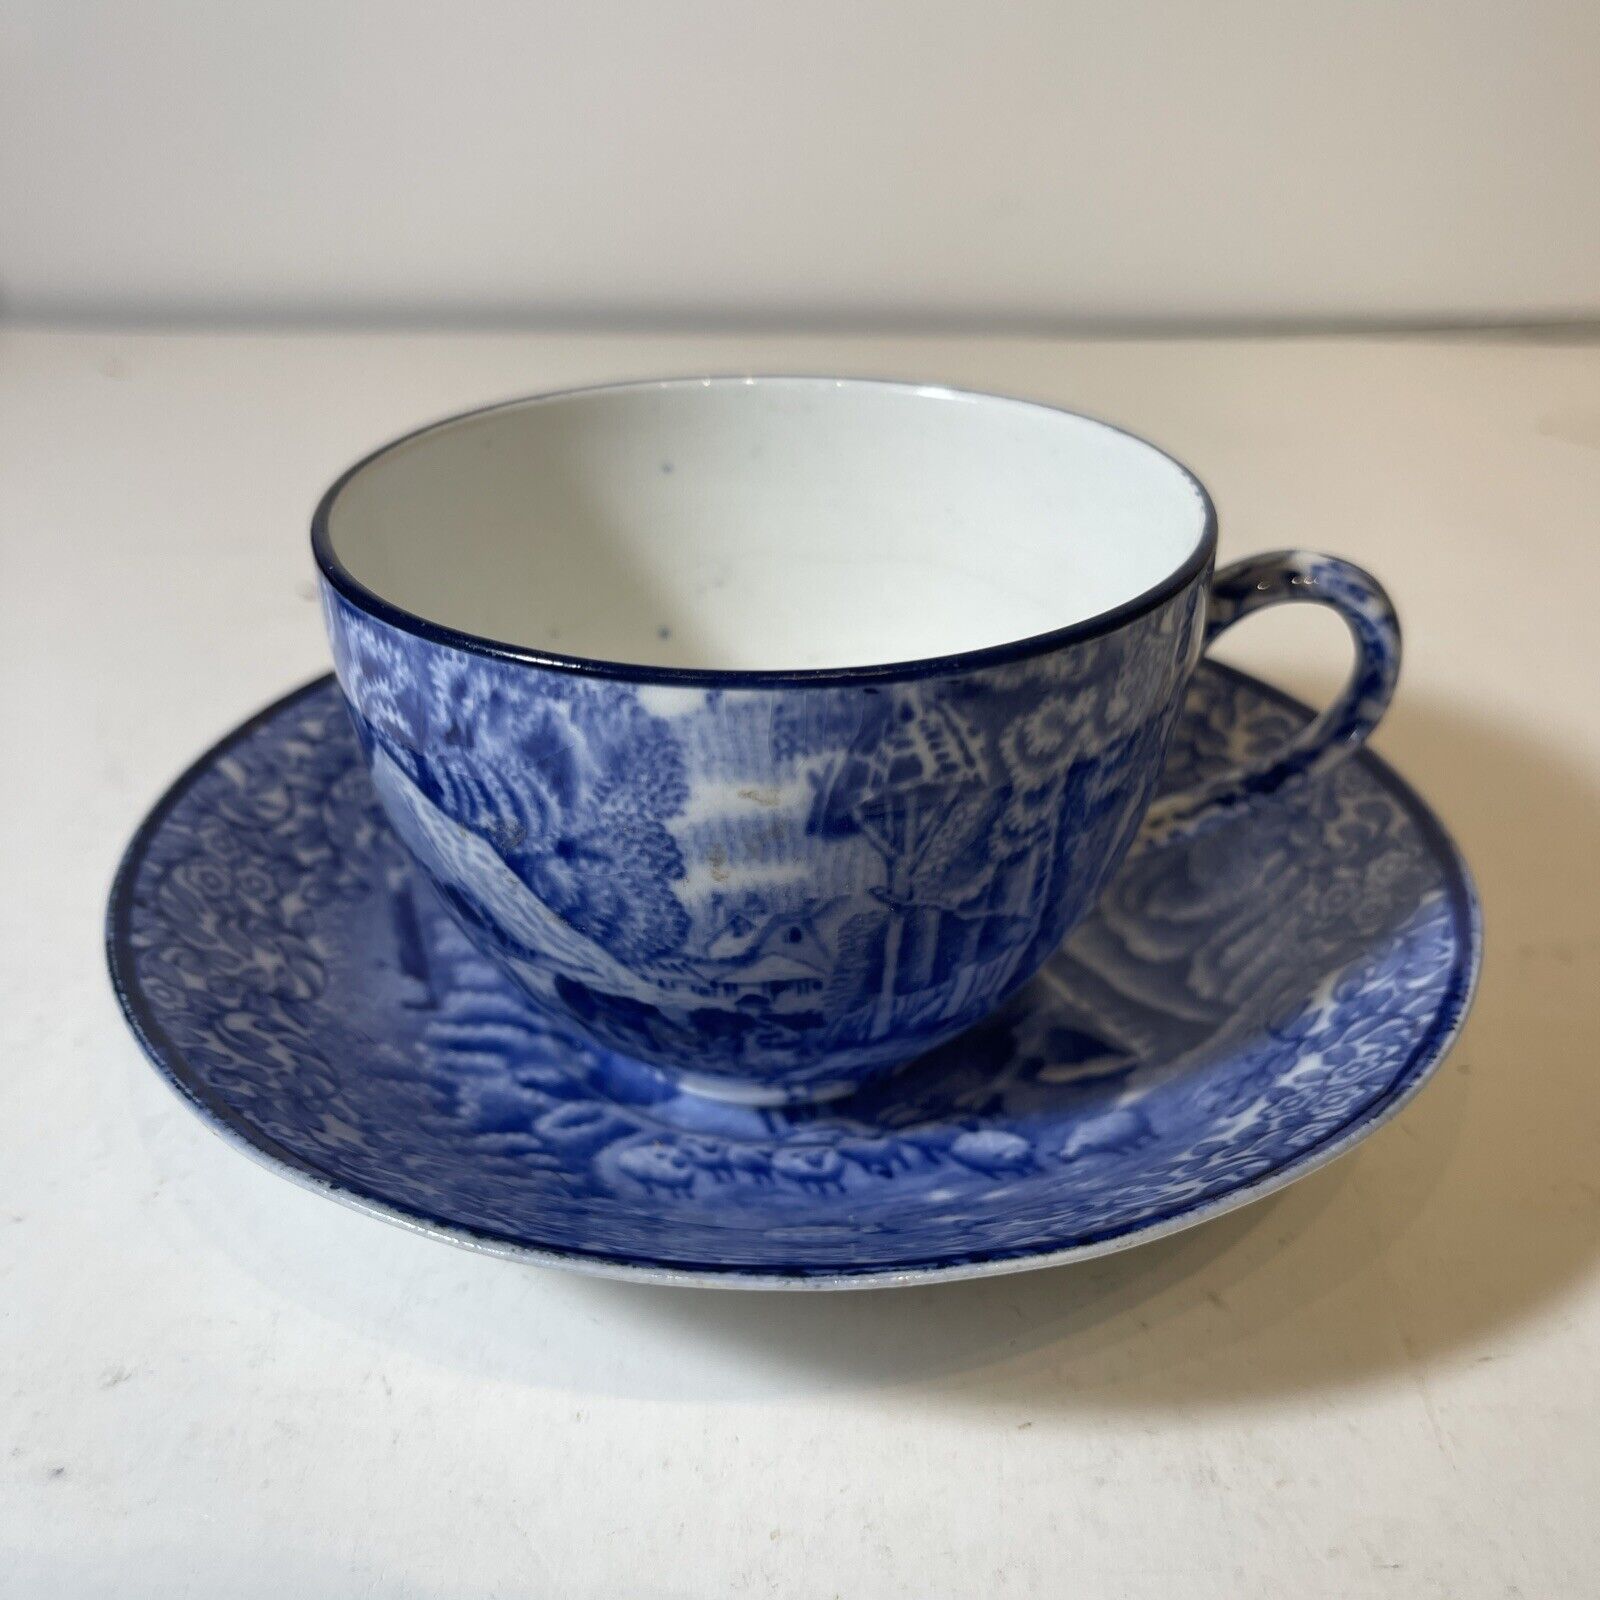 Antique 1900's Ye Old Foley Fenton England Blue And White Teacup And Saucer Rare